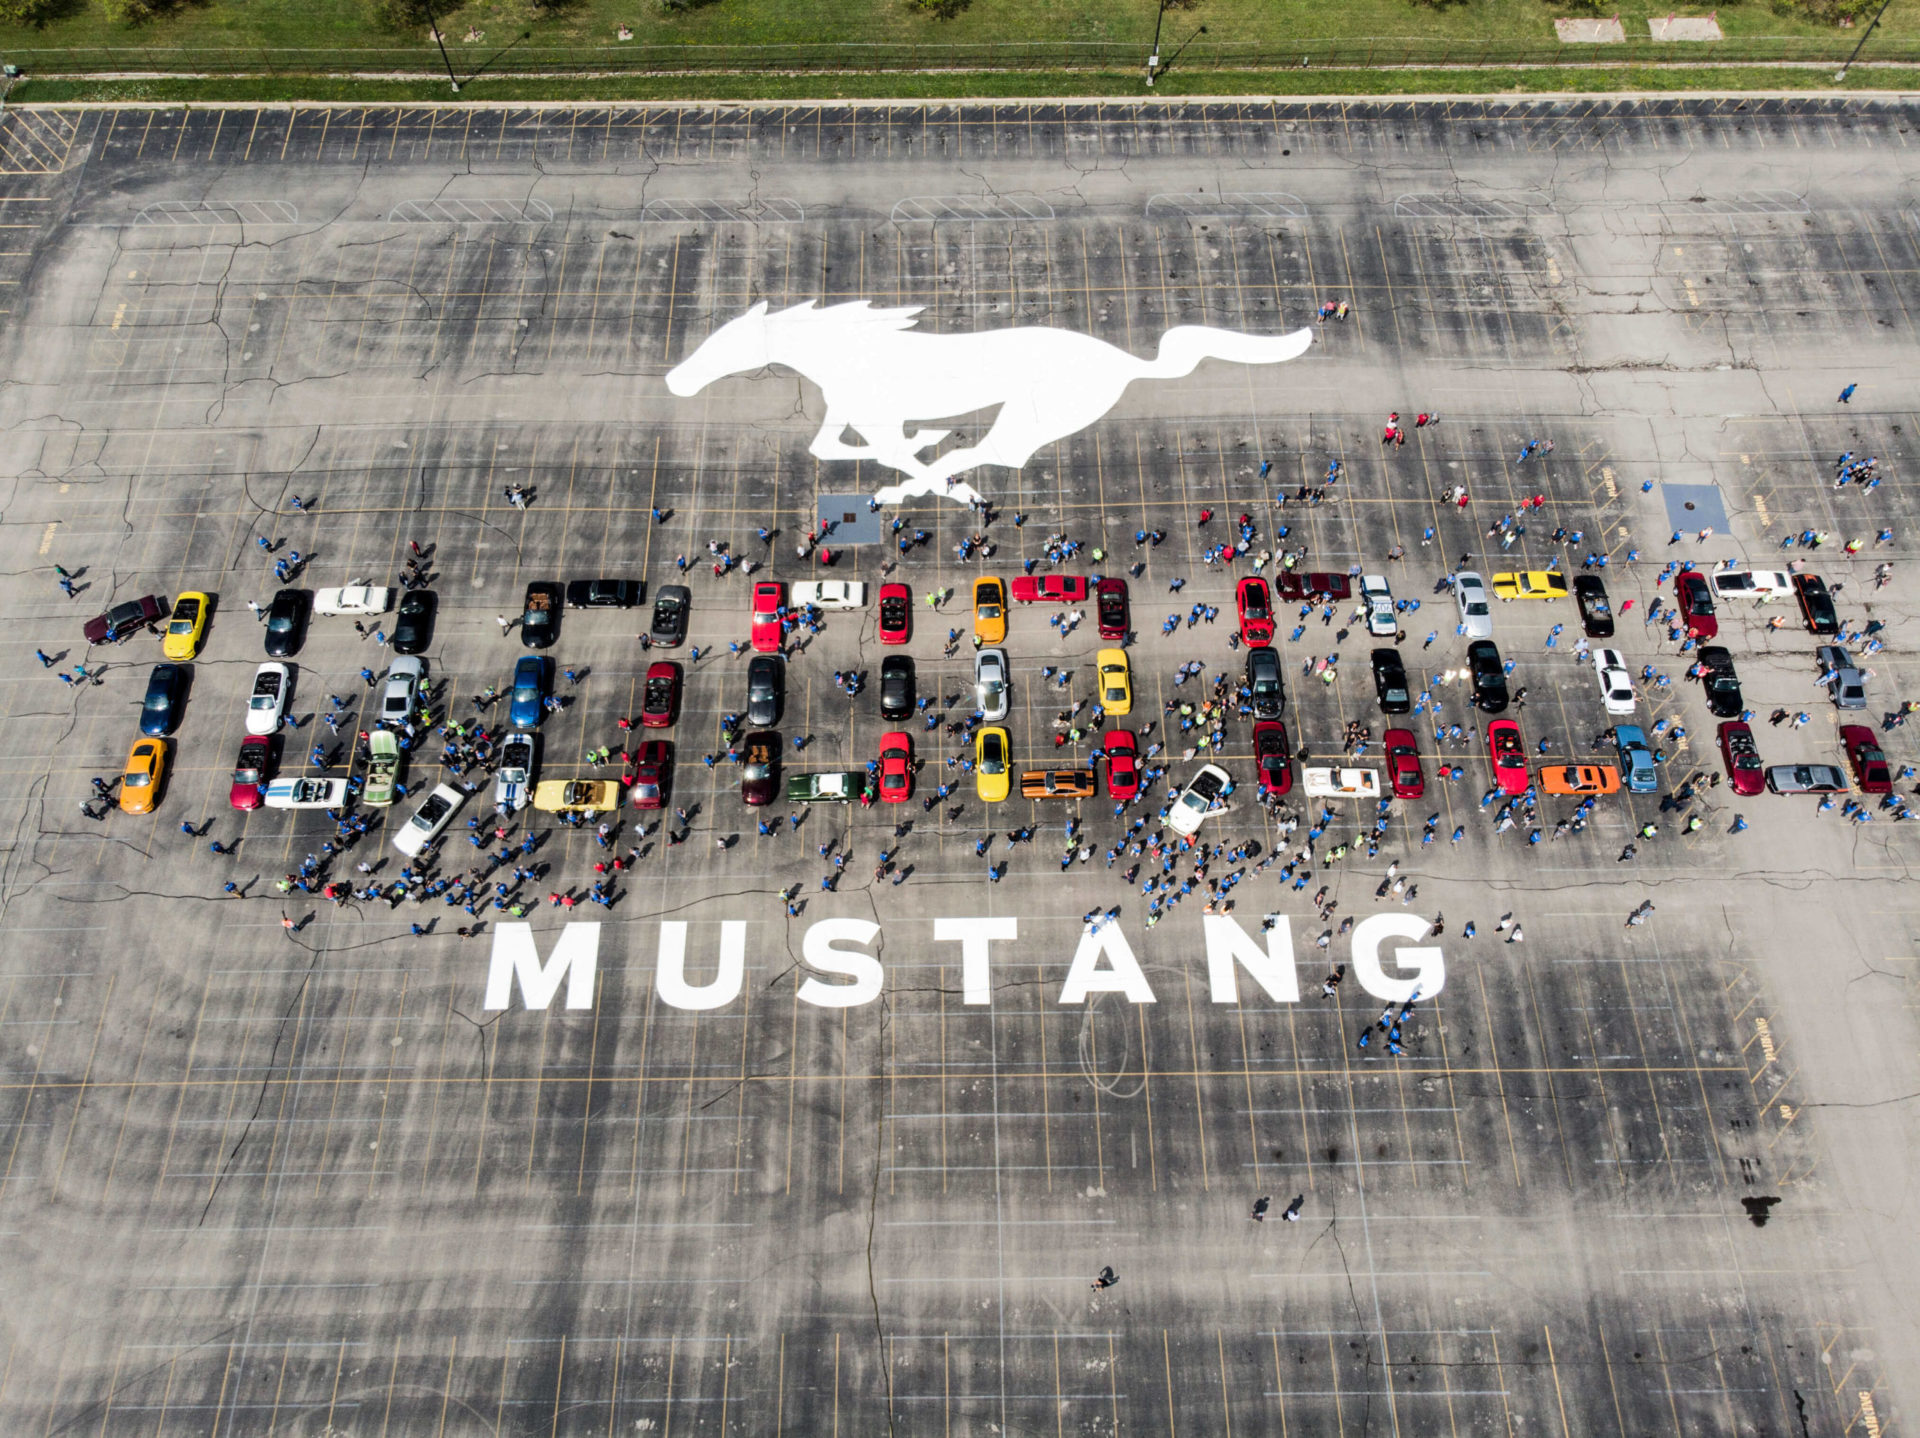 10 millionth ford mustang